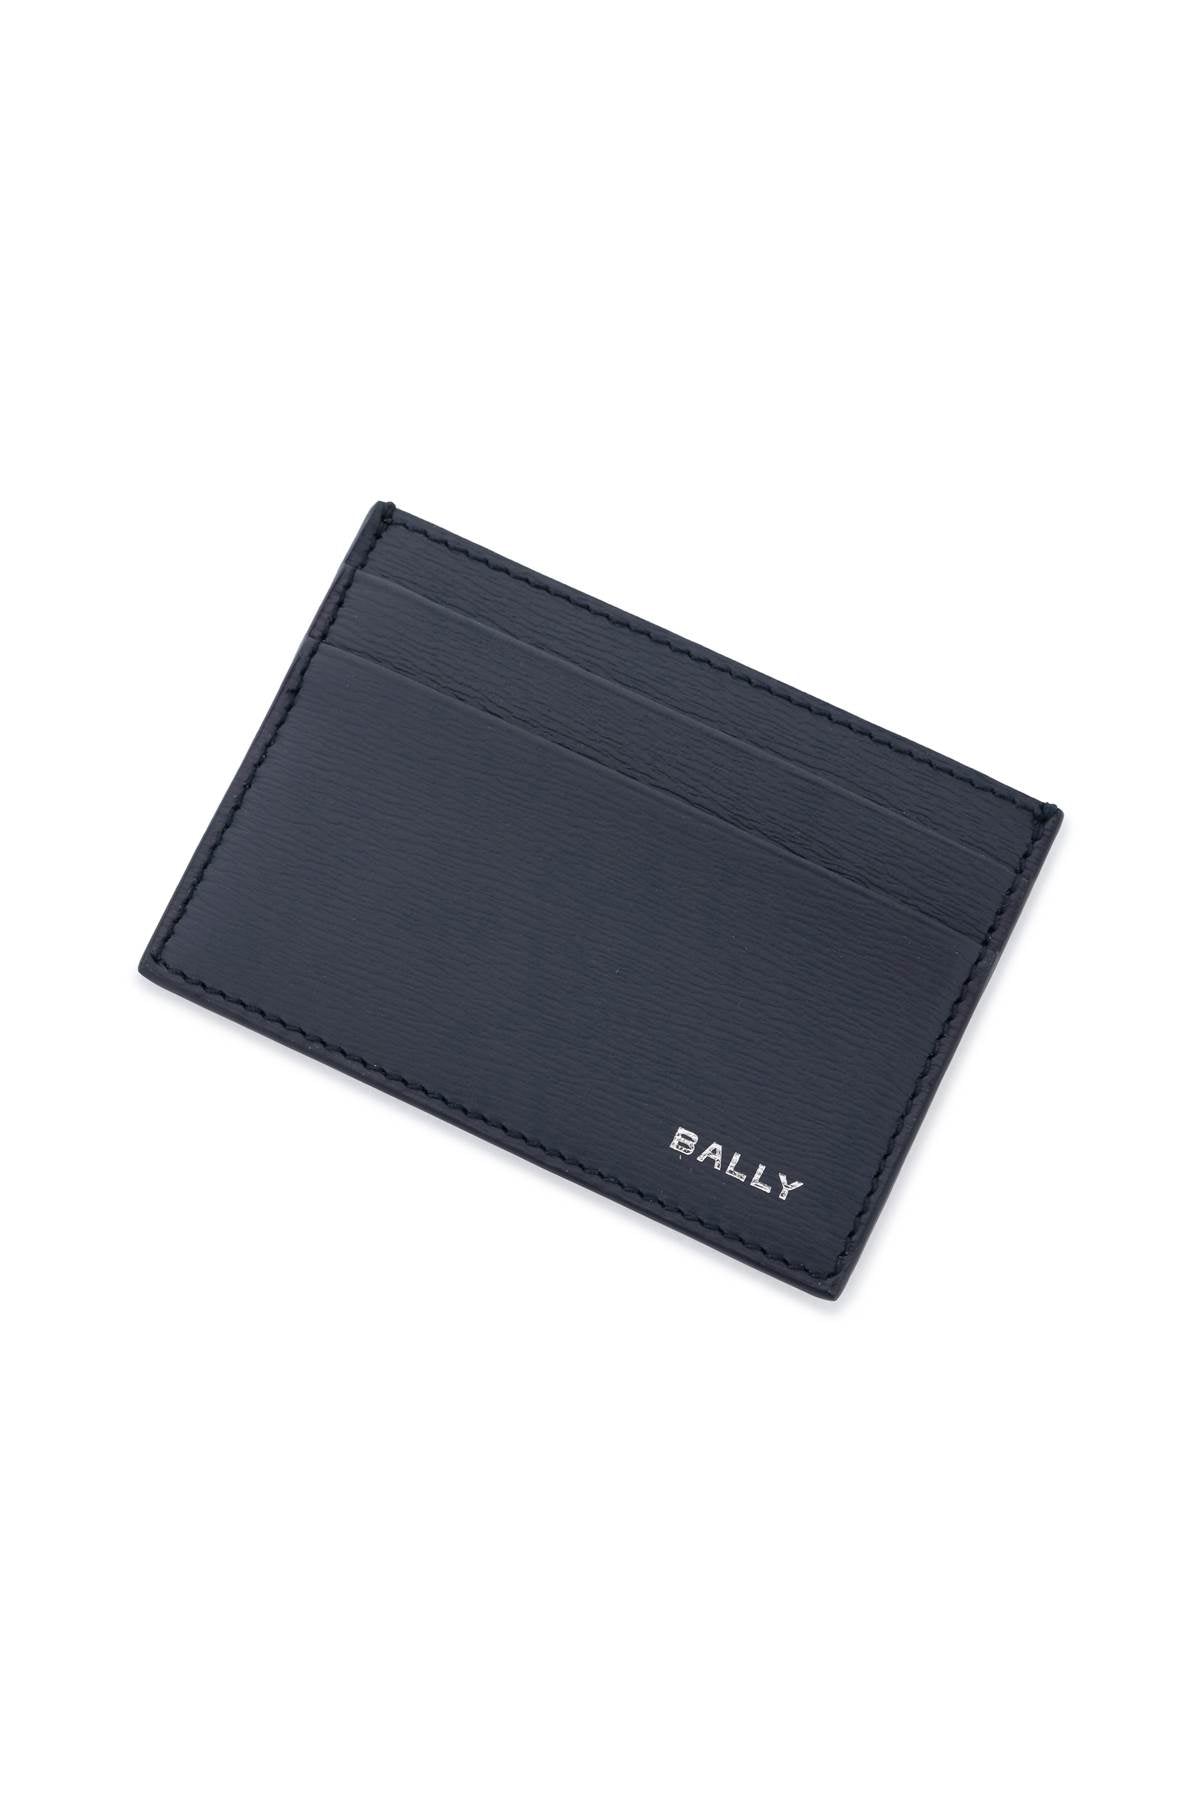 Bally leather crossing cardholder-1